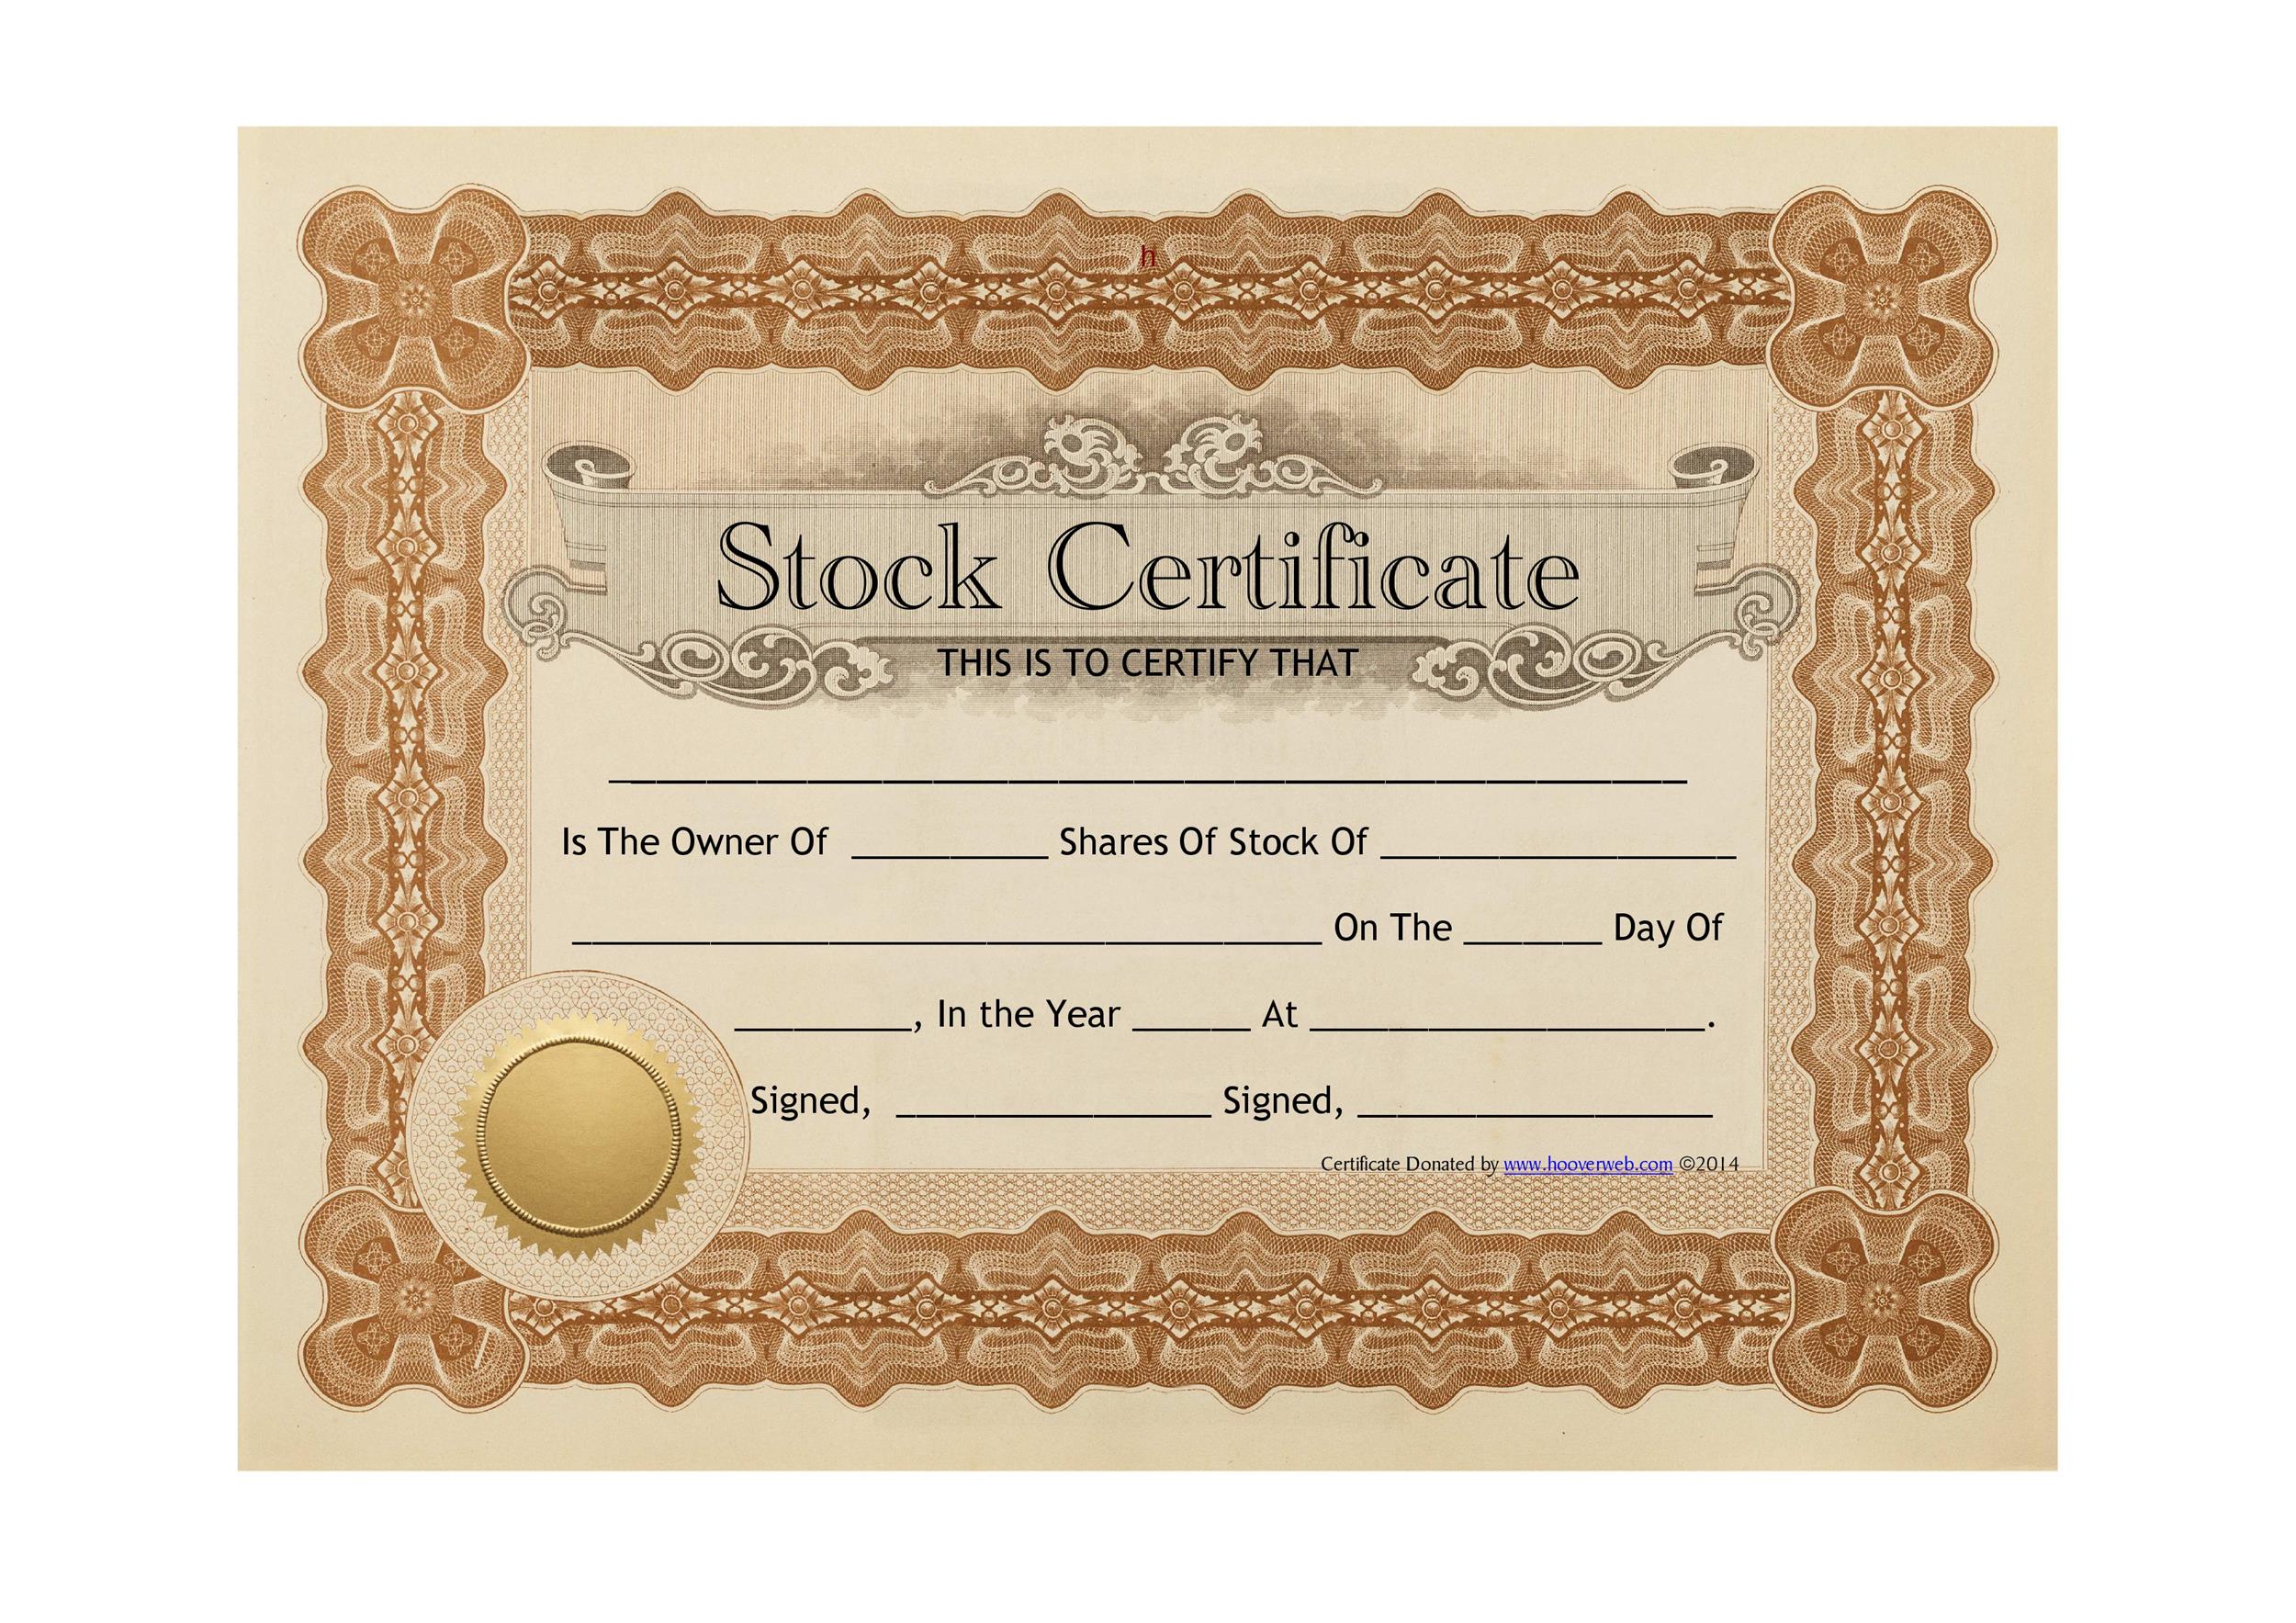 What Is A Stock Certificate